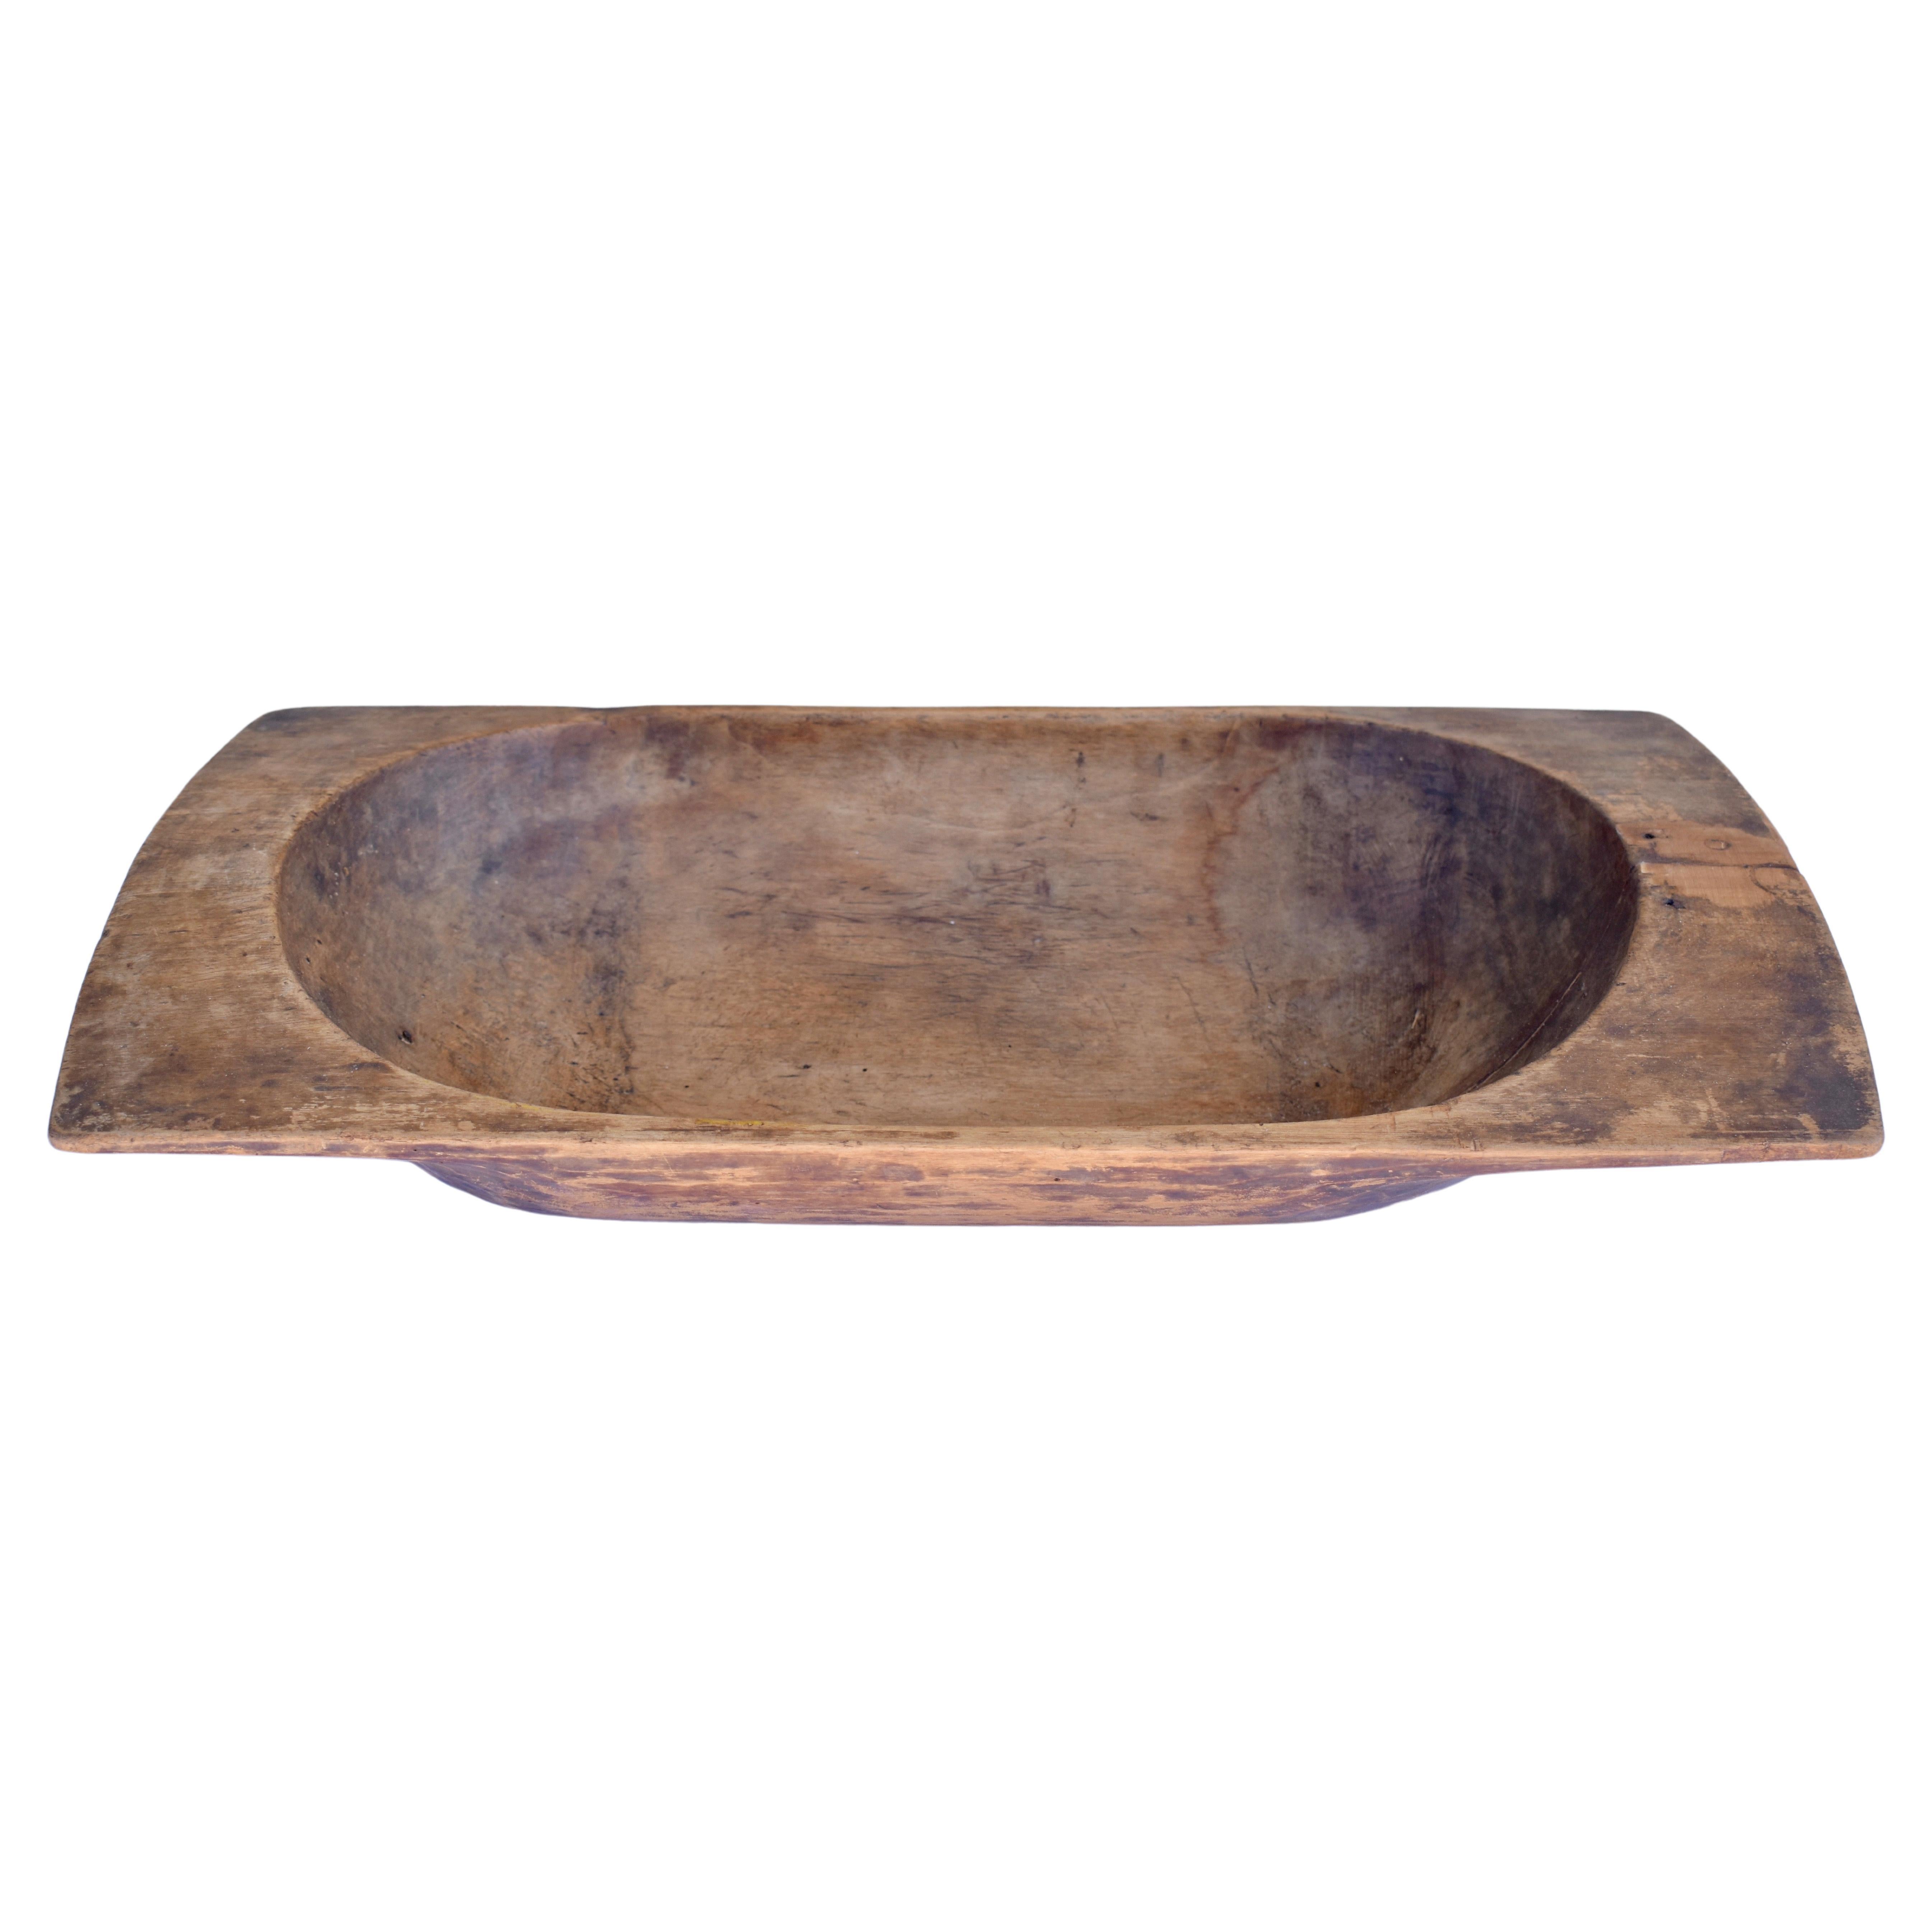 Hand-Hewn Fruitwood Trog or Dough Bowl For Sale